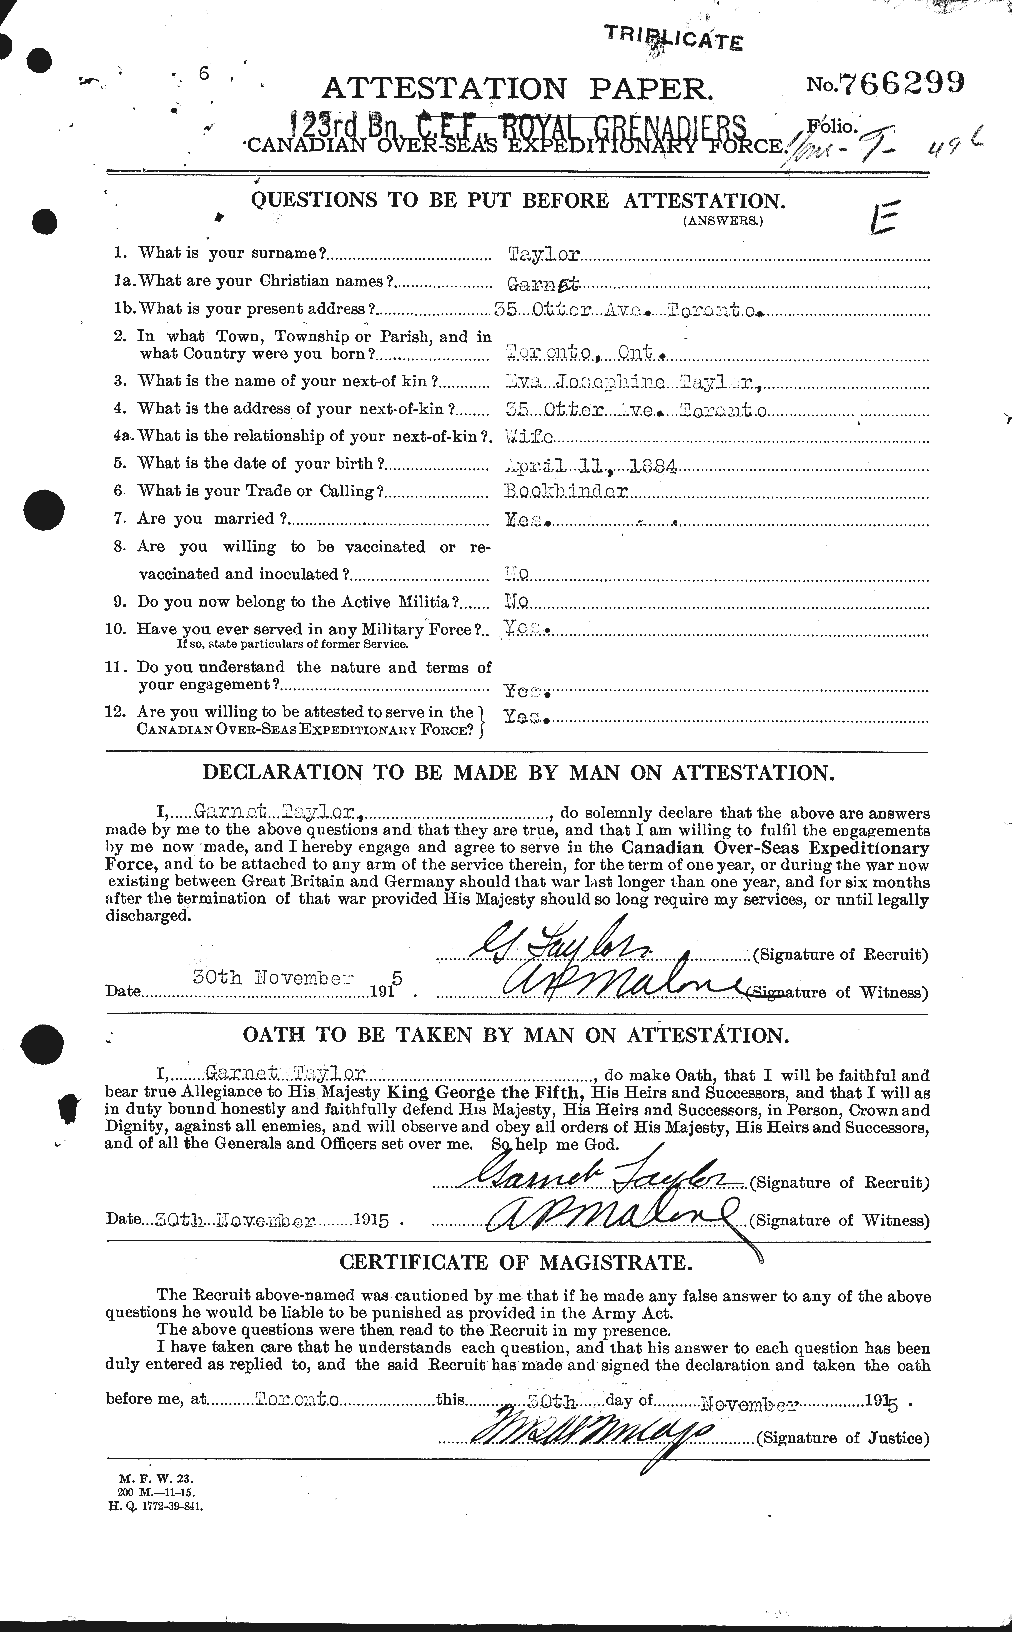 Personnel Records of the First World War - CEF 625832a